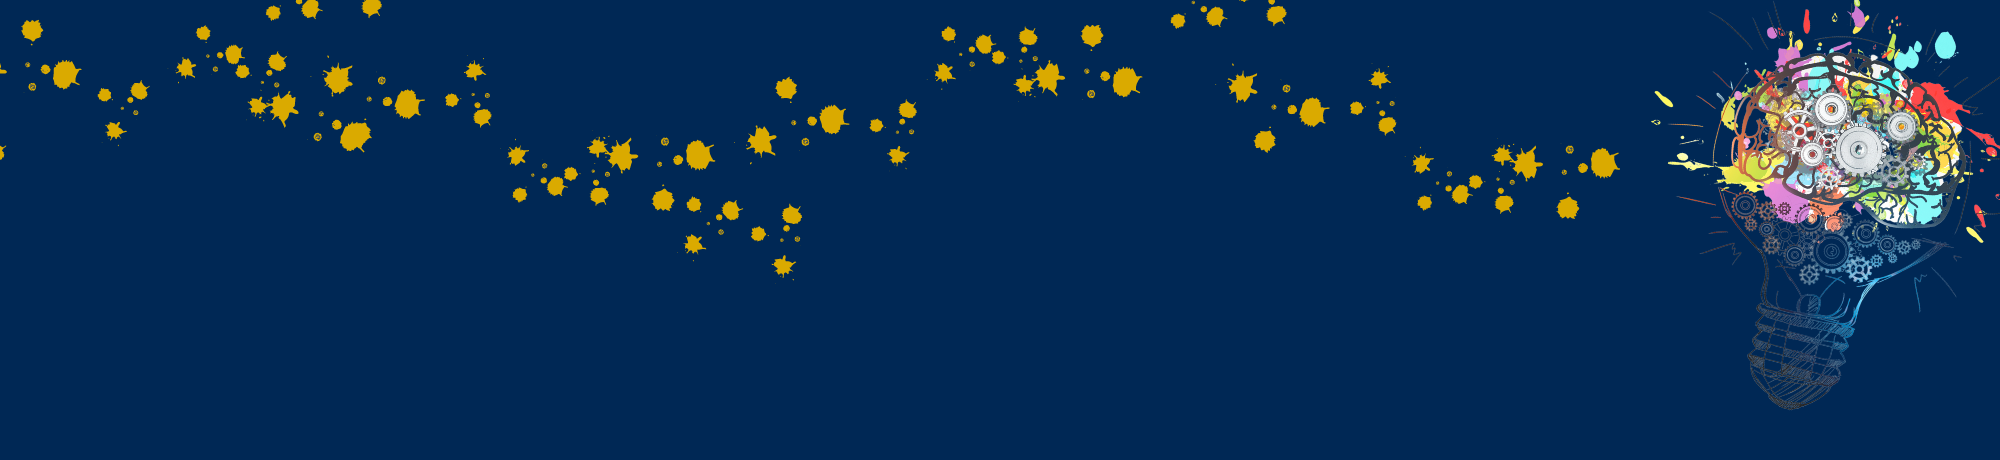 A web banner with a graphic art drawing of a light bulb with a multicolor brain and sparks and splashes of color on a dark blue background with a trail of sparks in gold